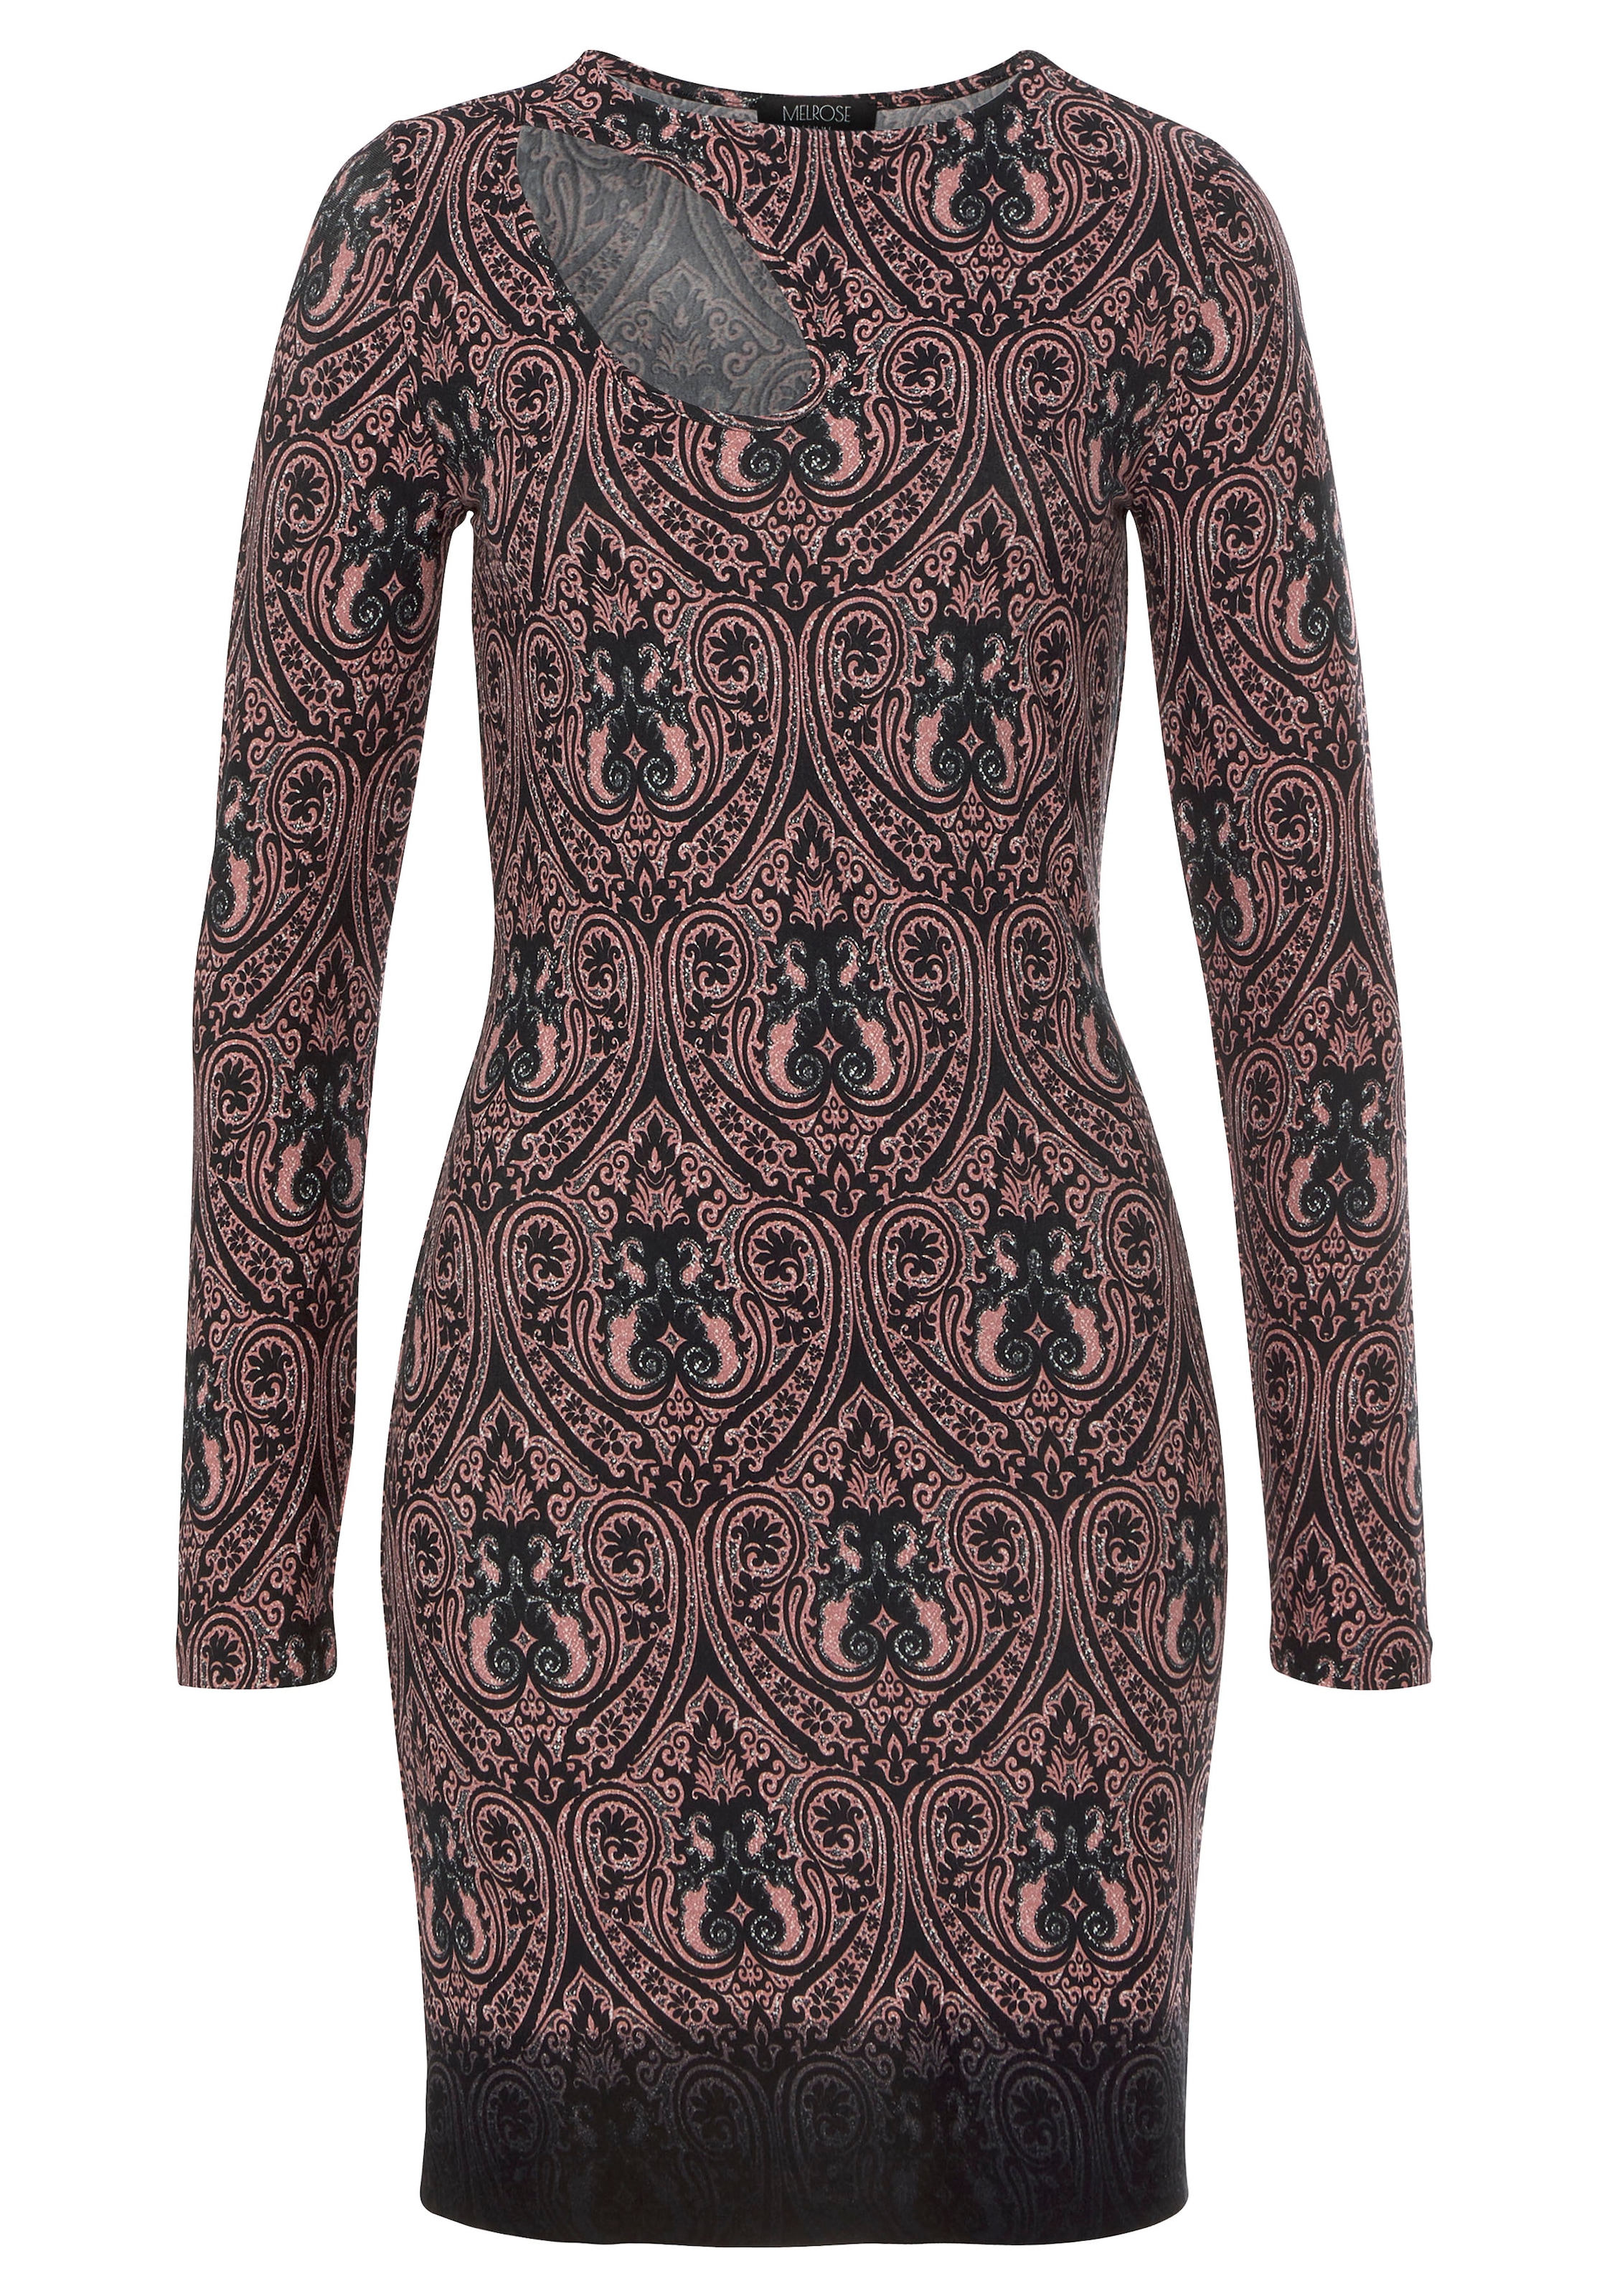 und Paisley-Muster Melrose Jerseykleid, mit ♕ bei Cut-Out